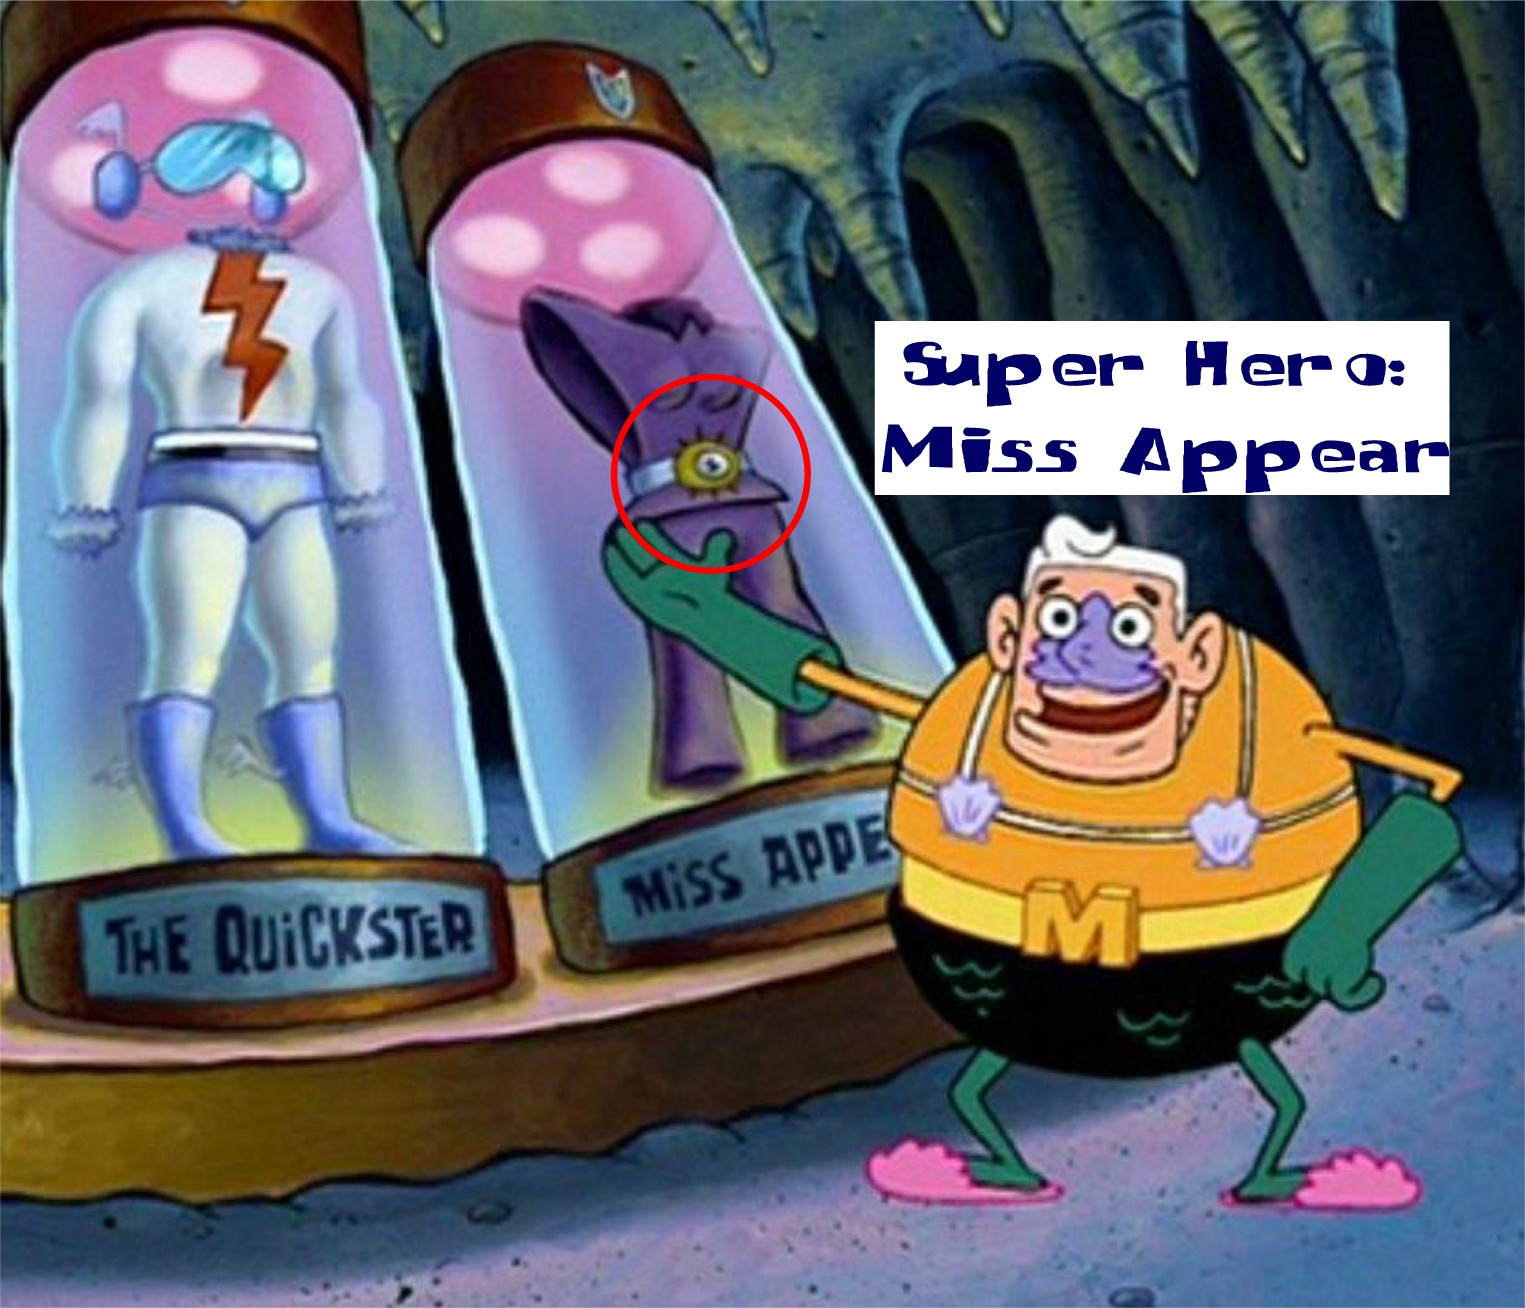 mermaidman and barnacle boy action figures - Super Hero Miss Appear Miss Appe The Quickster